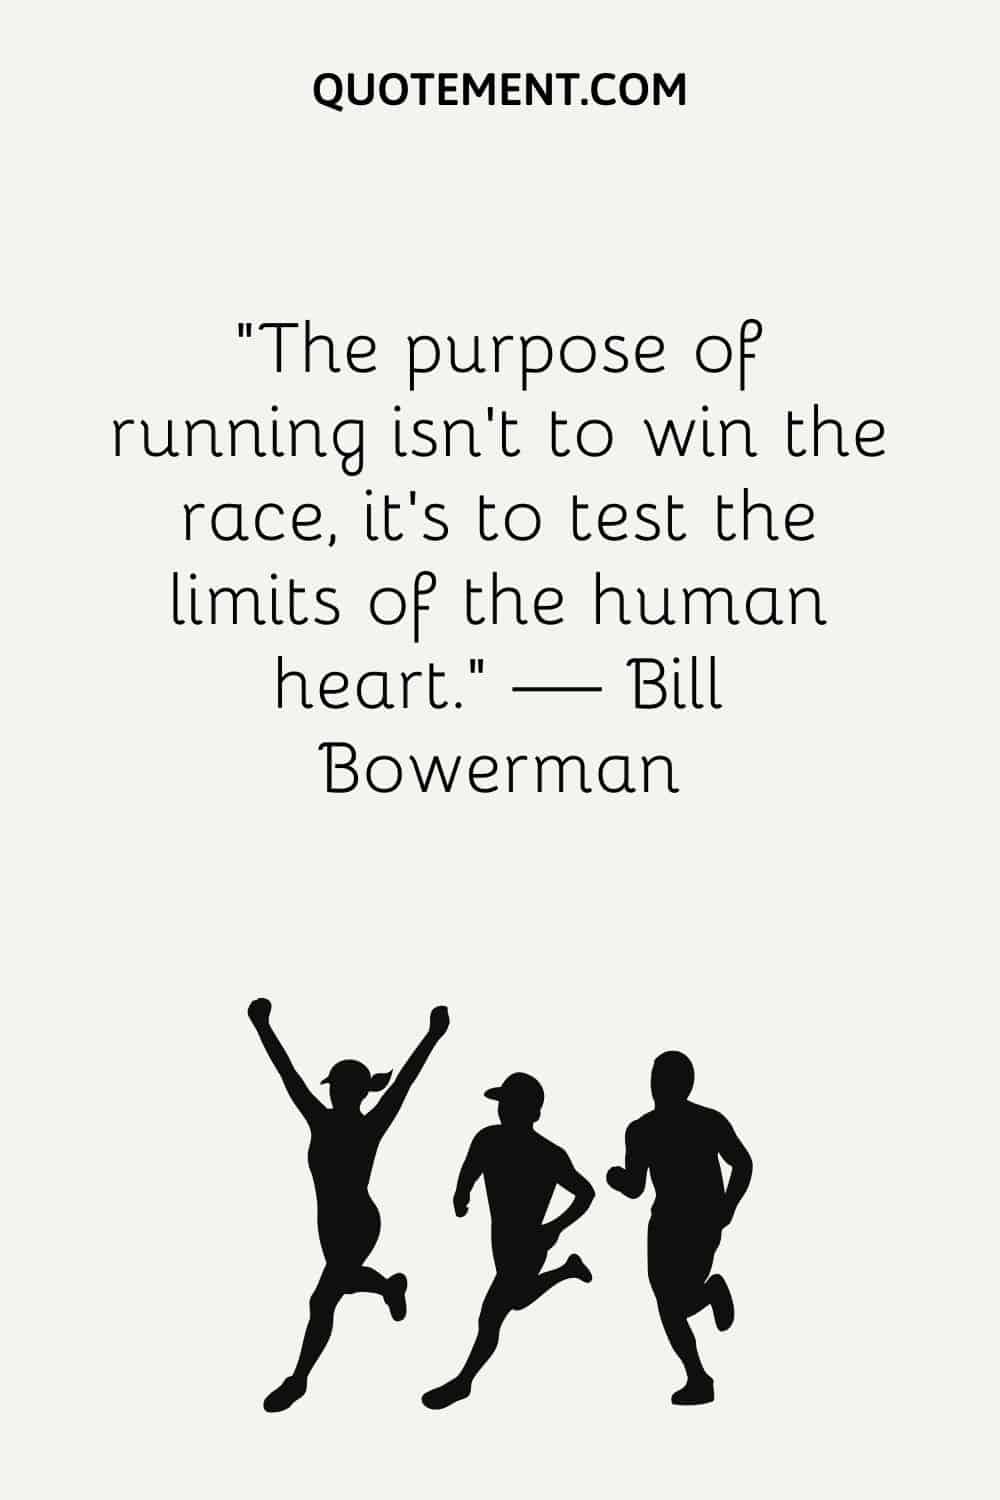 The purpose of running isn’t to win the race, it’s to test the limits of the human heart